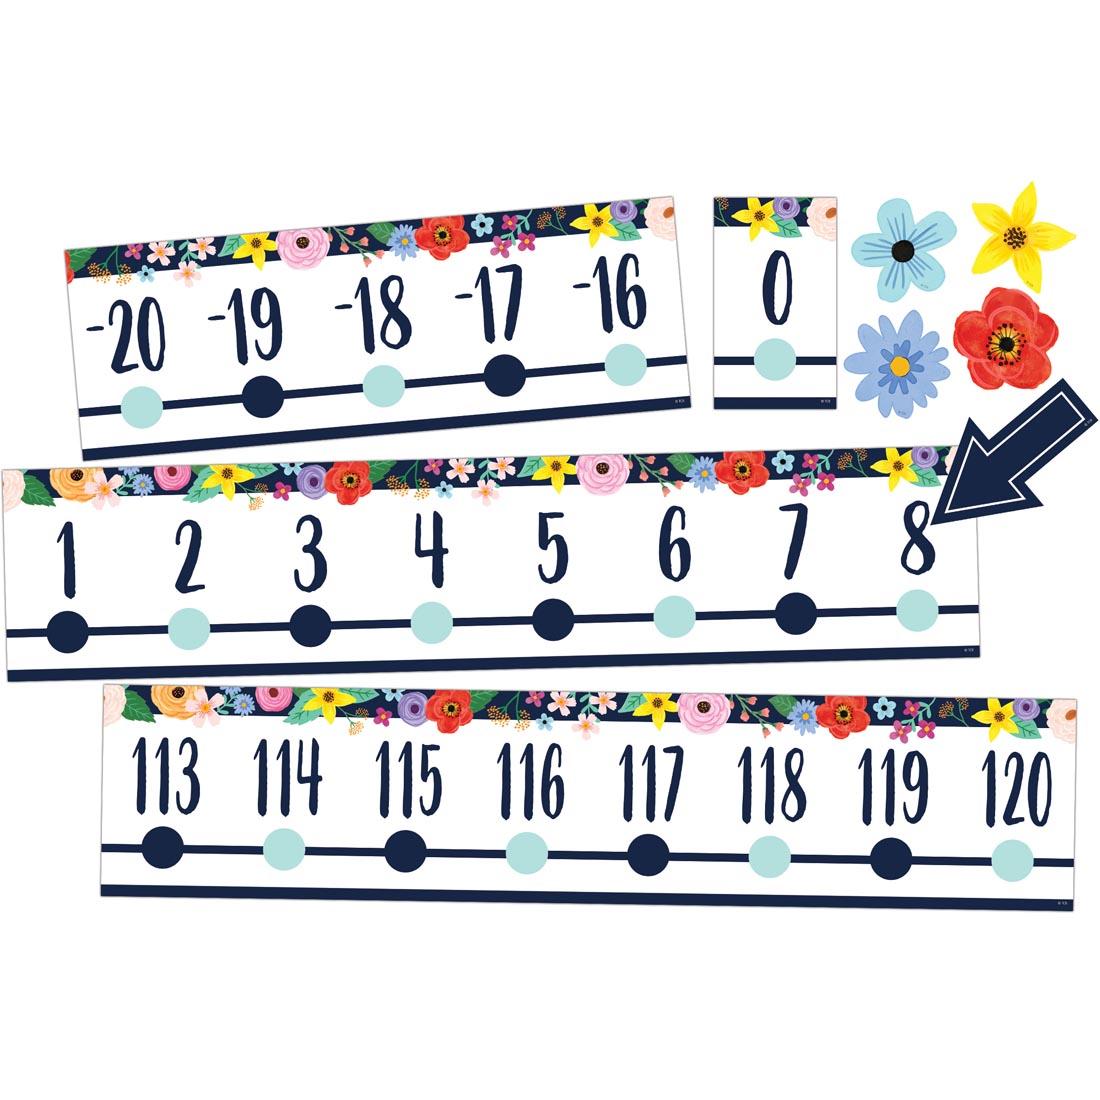 pieces of the Number Line -20 to 120 Bulletin Board Set from the Wildflowers collection by Teacher Created Resources